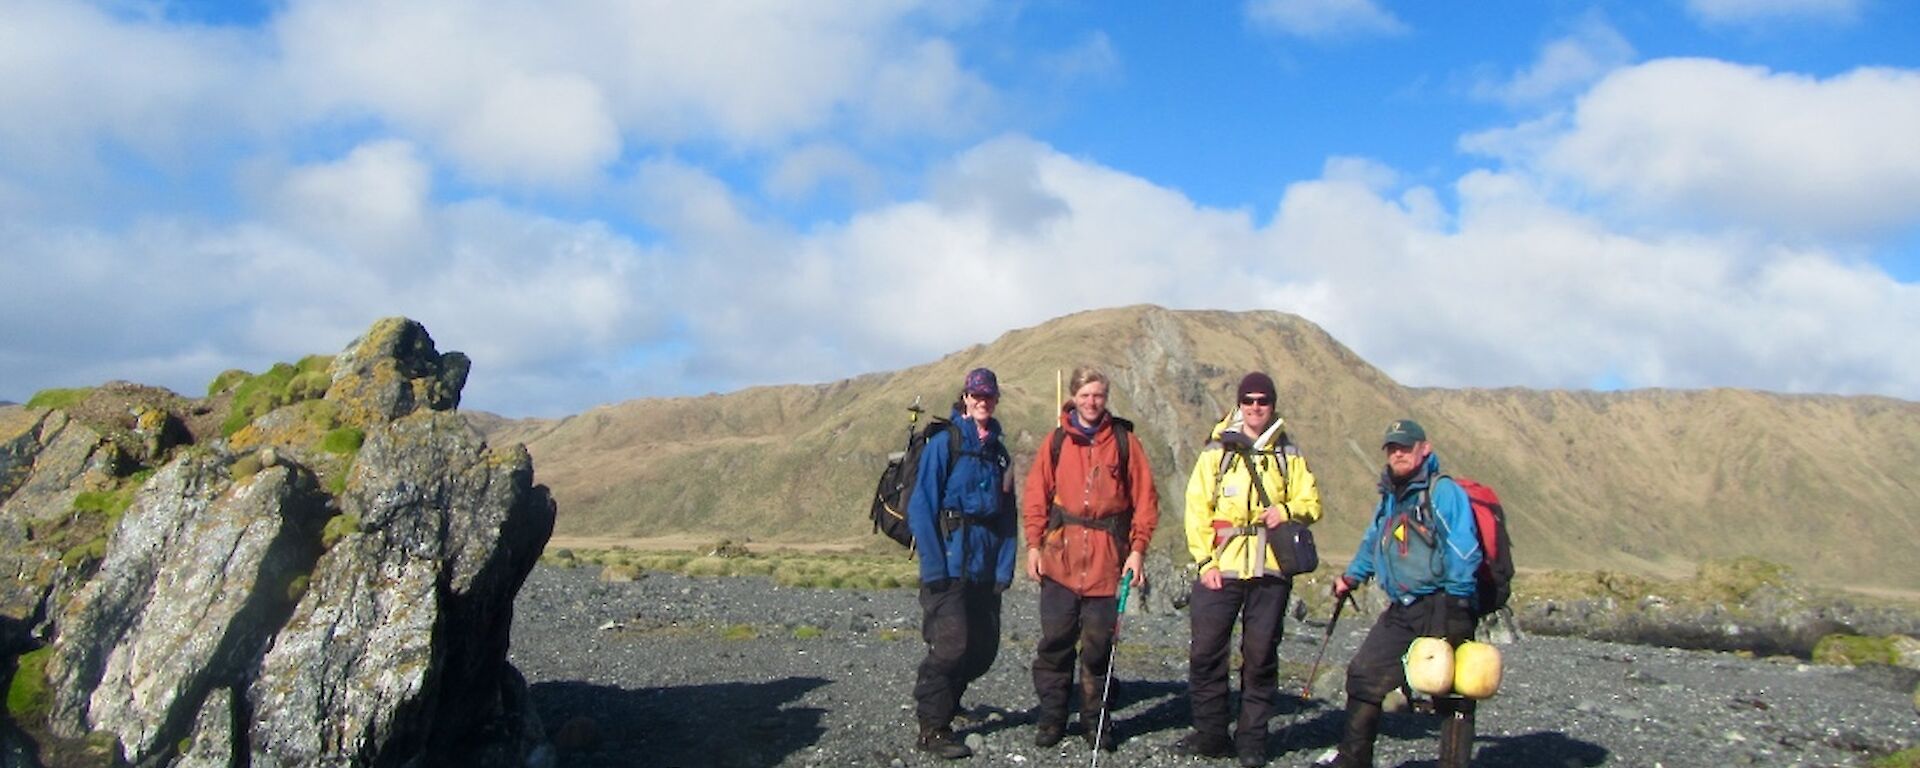 Group photo of four people ready to set out on northern giant petrel census